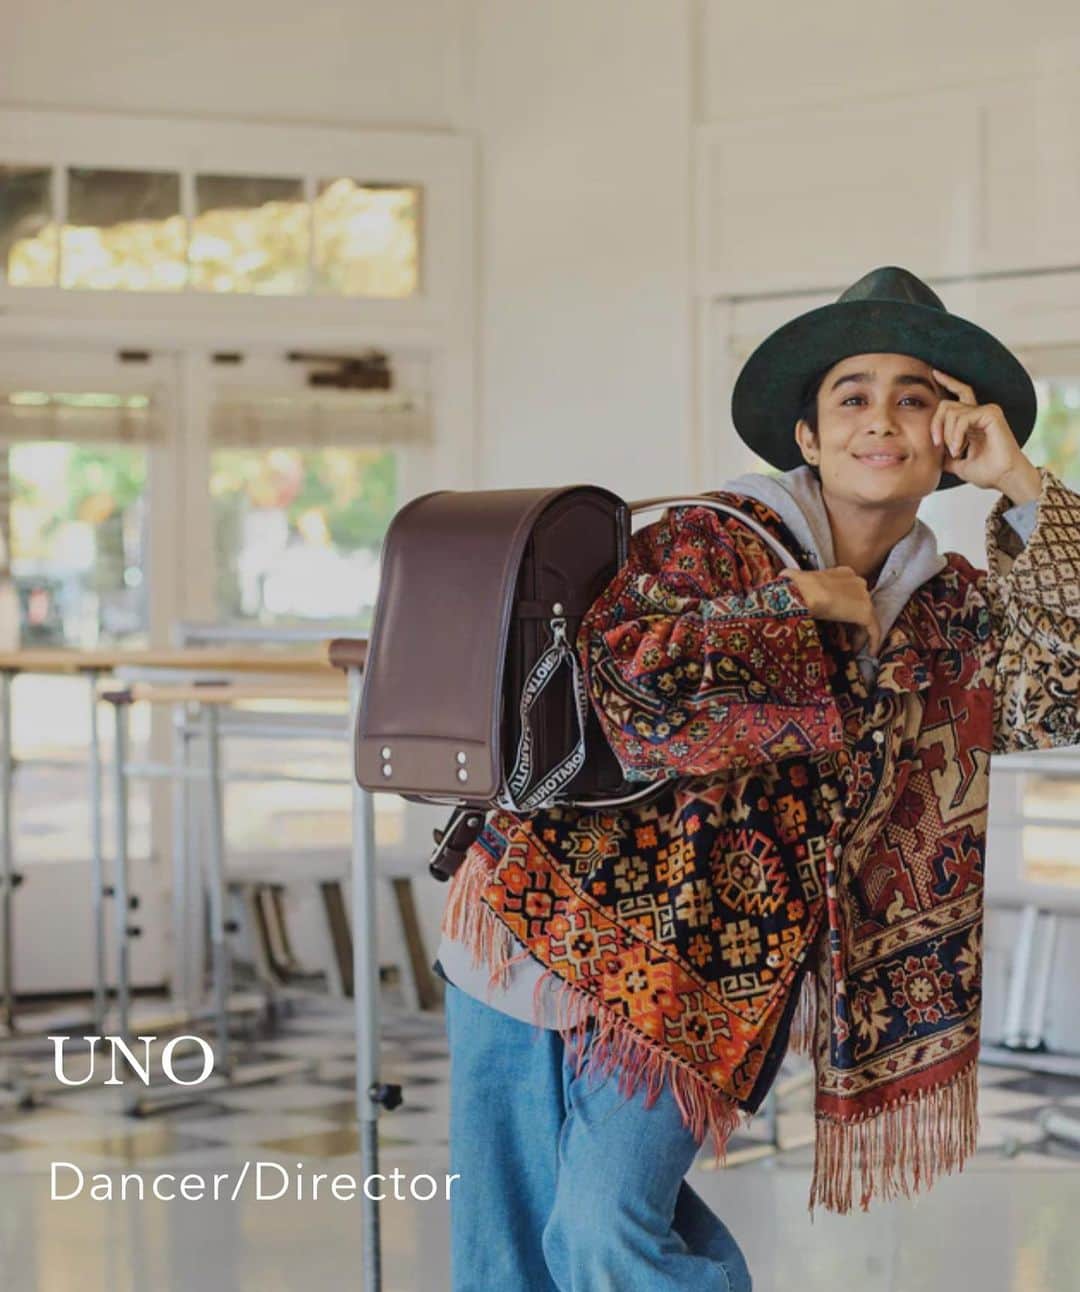 UNOのインスタグラム：「Meet Uno 〰️ Dancer, Choreographer, Director, Friend Maker and Tsuchiya Kaban Ambassador.  Uno is currently living in Portland, OR but was born in Japan and has fond memories of her childhood Randoseru backpack.  Today she still finds the utilitarian bag has a place in her everyday life of studio bouncing, teaching and traveling to Japan. Read more about Uno’s story and her goals to make dance a more inclusive space 🎶 @unoboooo」